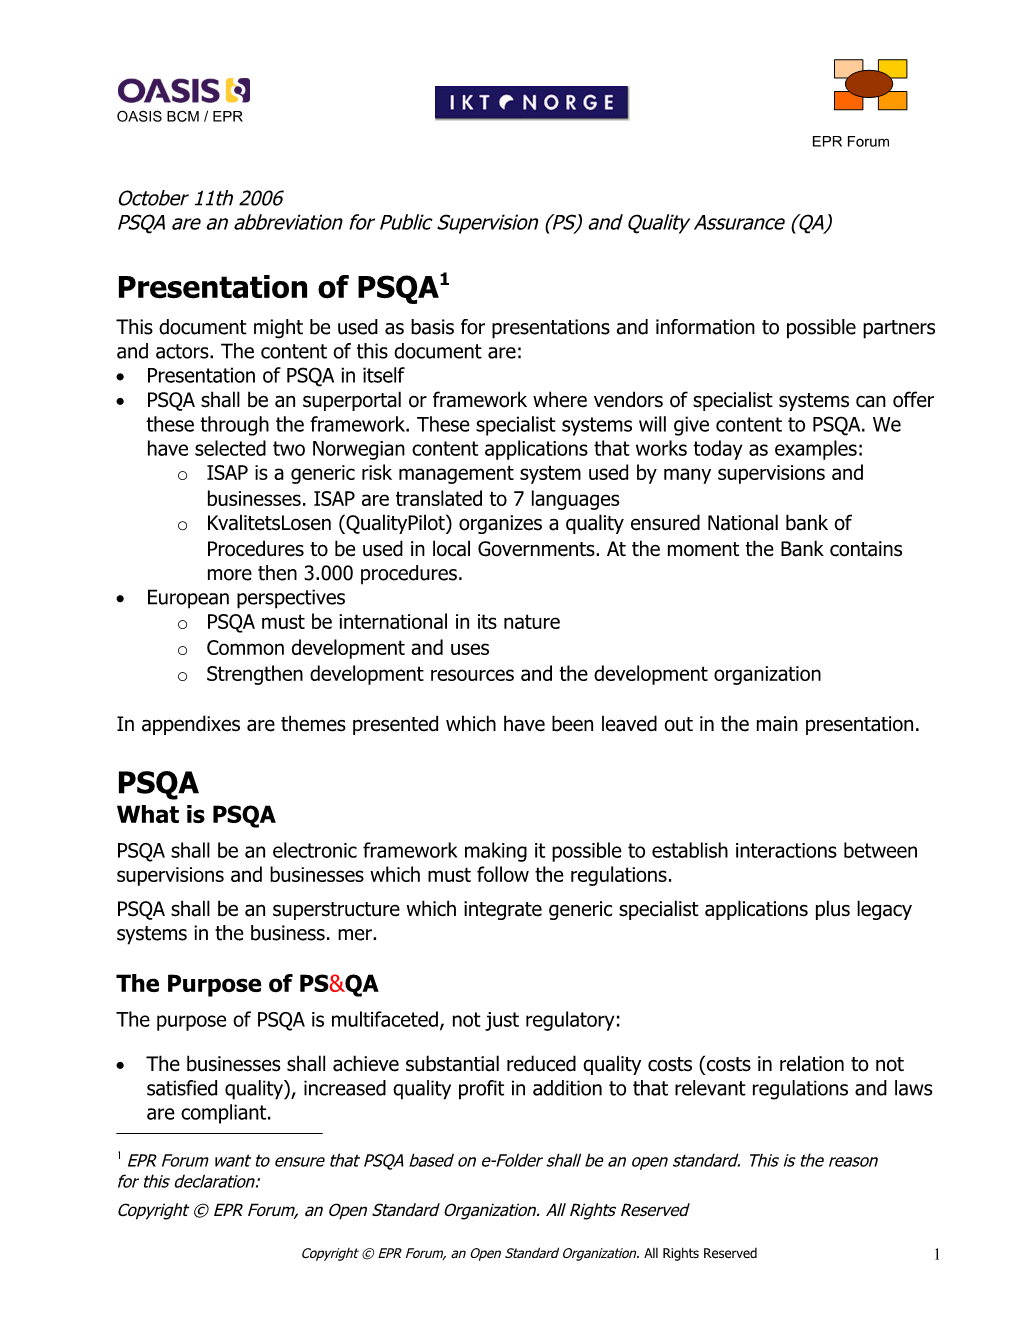 PSQA Are an Abbreviation for Public Supervision (PS) and Quality Assurance (QA)